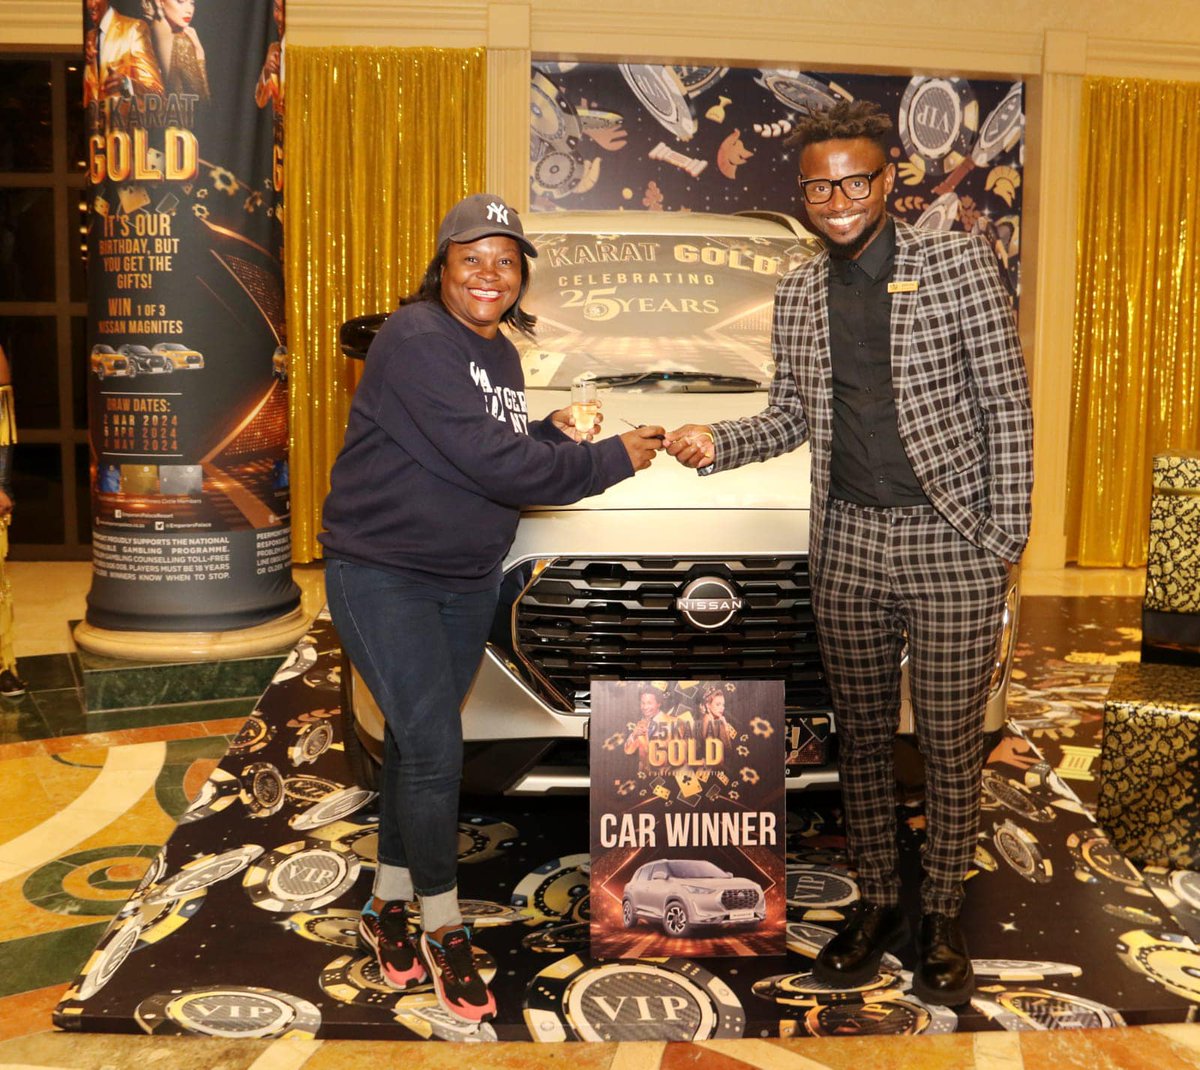 Second 25 Karat Car Won On 6 April #EmperorsPalace held it’s second Car Draw for the #25KaratGold promotion. Congratulations to Amelia Nhlabathi from Boksburg who walked away with a brand new Nissan Magnite. Make sure that you play with your #WinnersCircle card to be eligible.